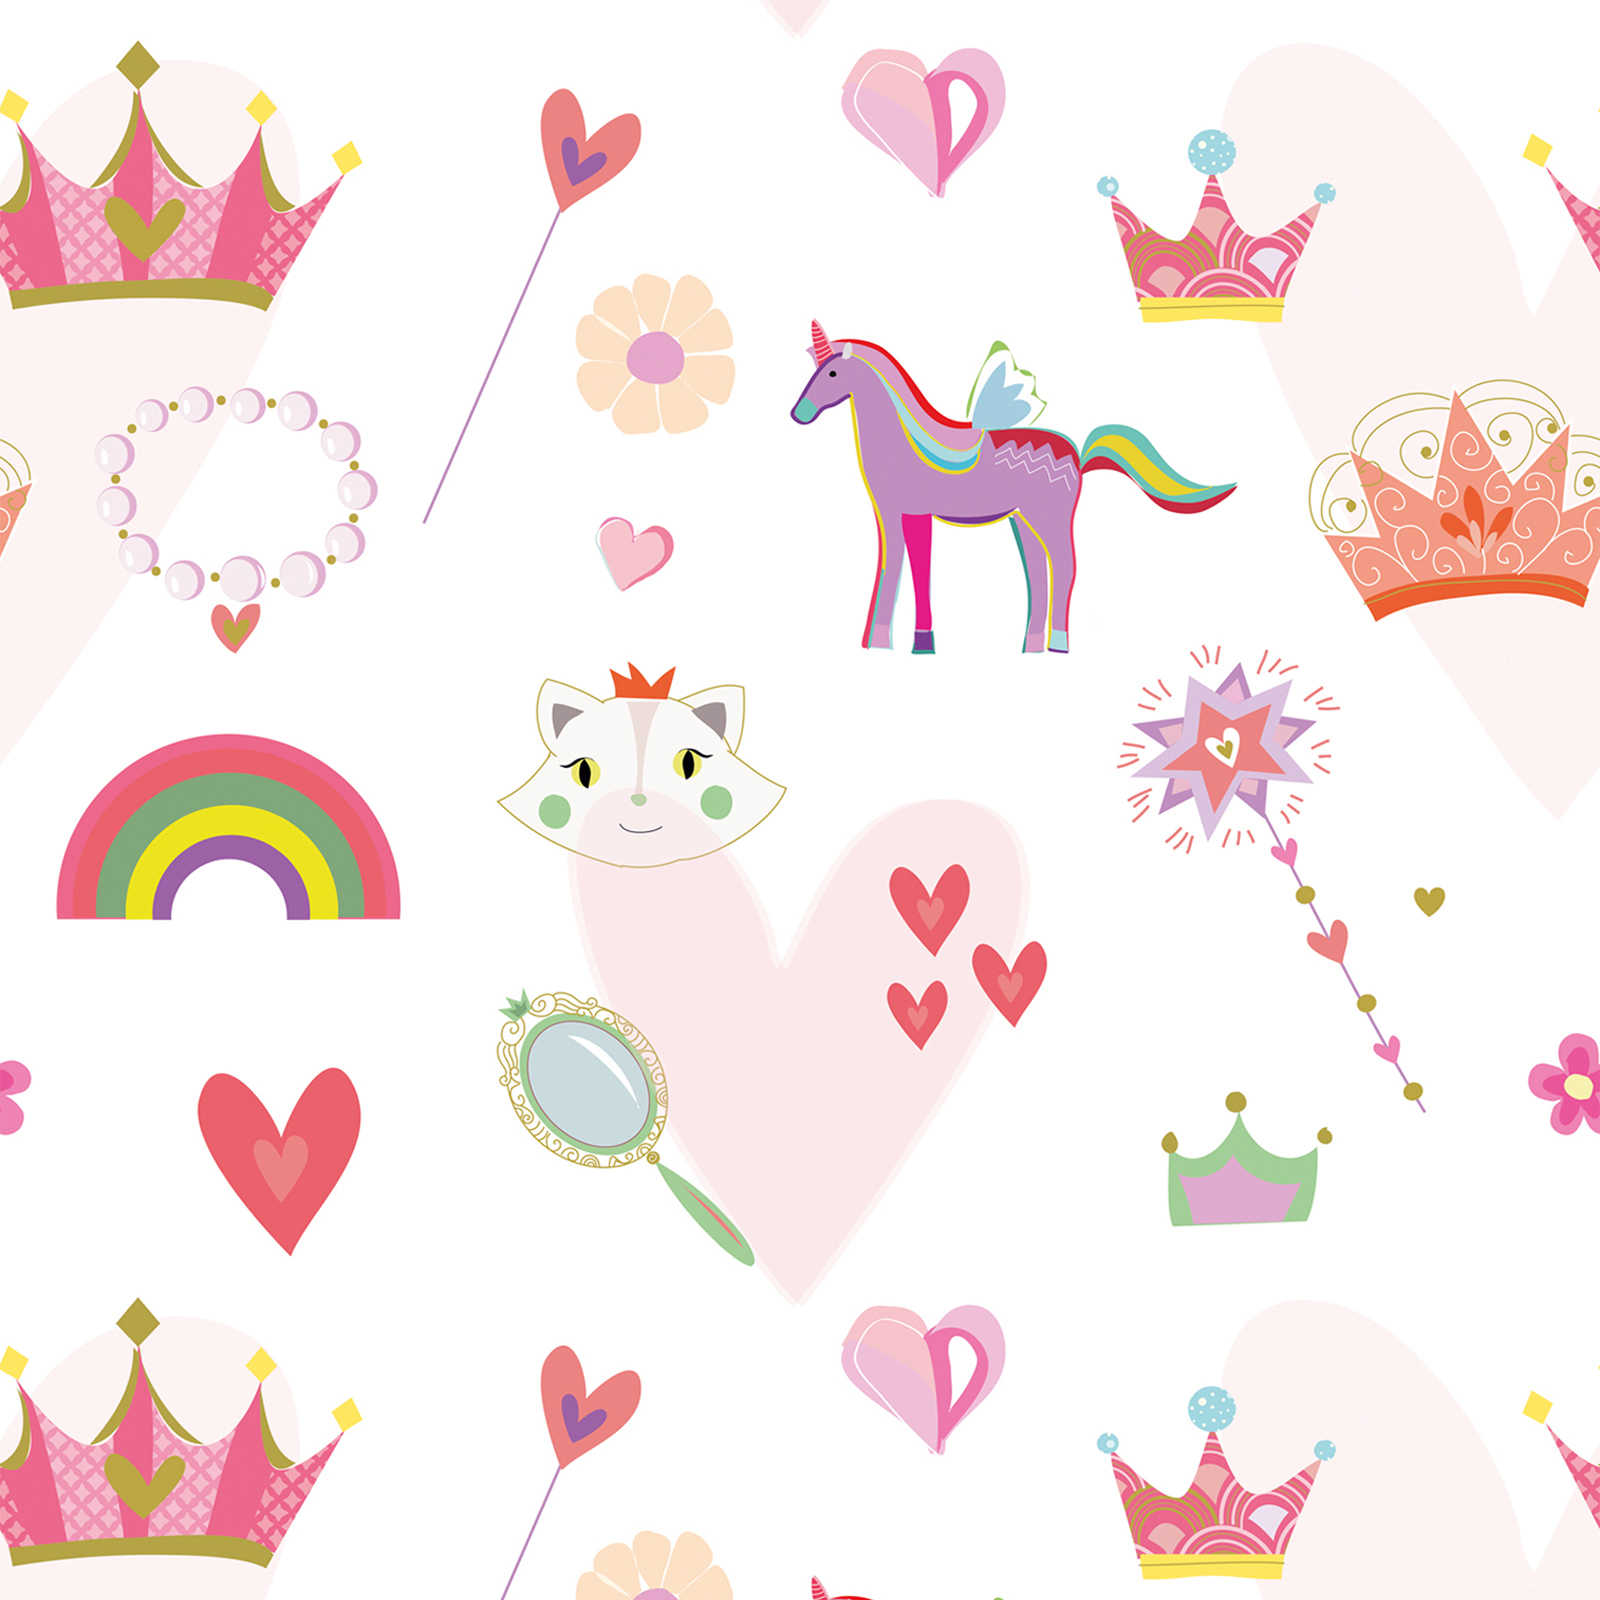 Children's wallpaper in princess style with hearts and animals - colourful, pink, white
